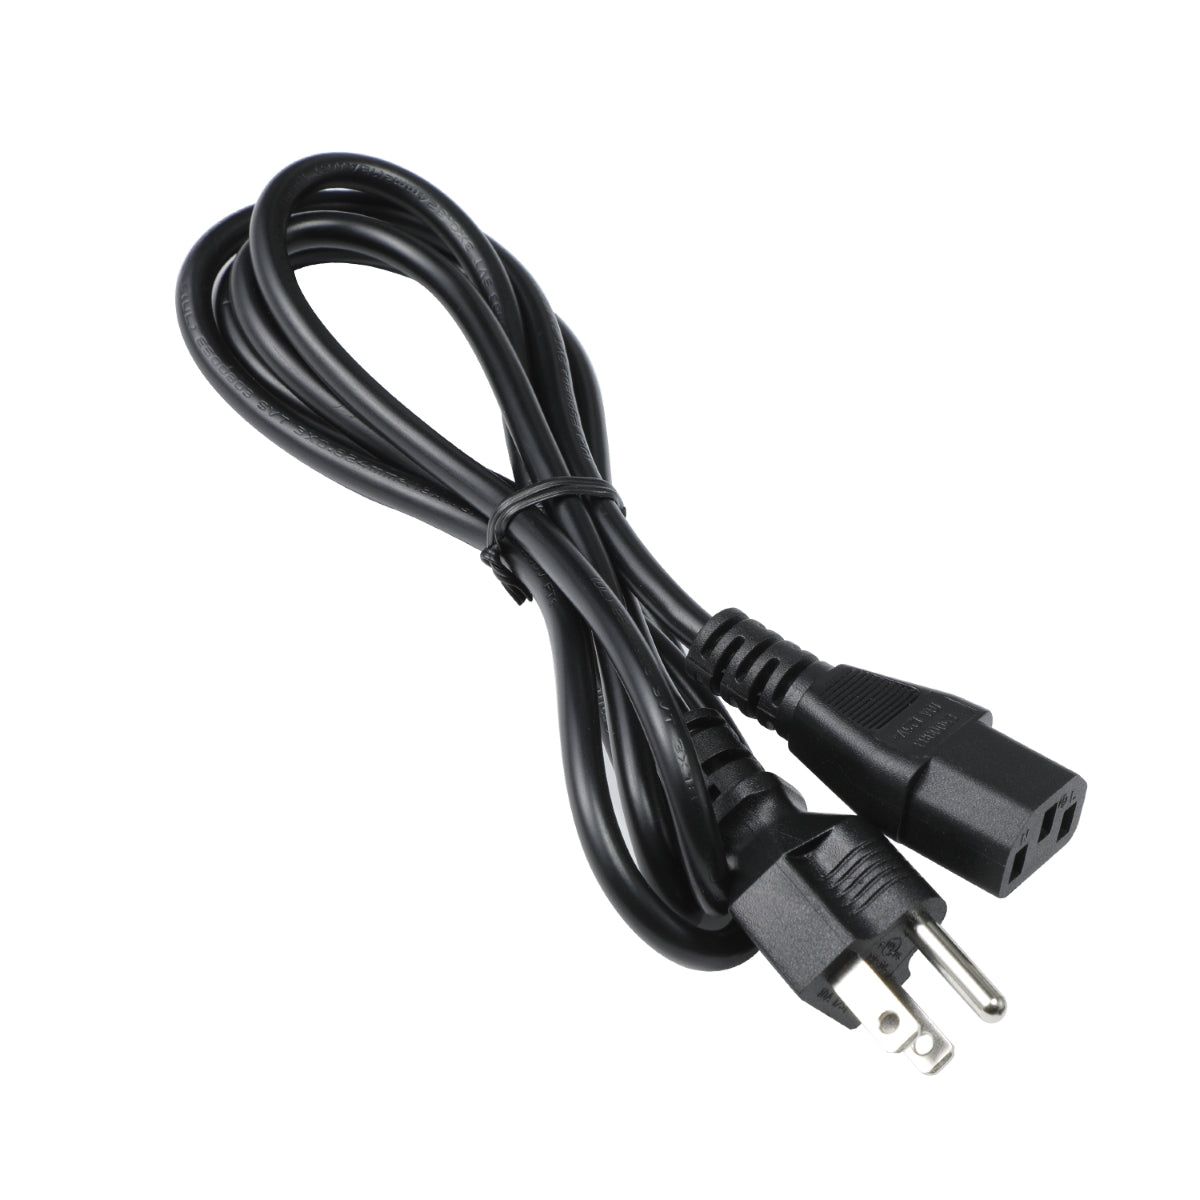 Power Cord for Acer PE320QK Bmiipruzx Monitor